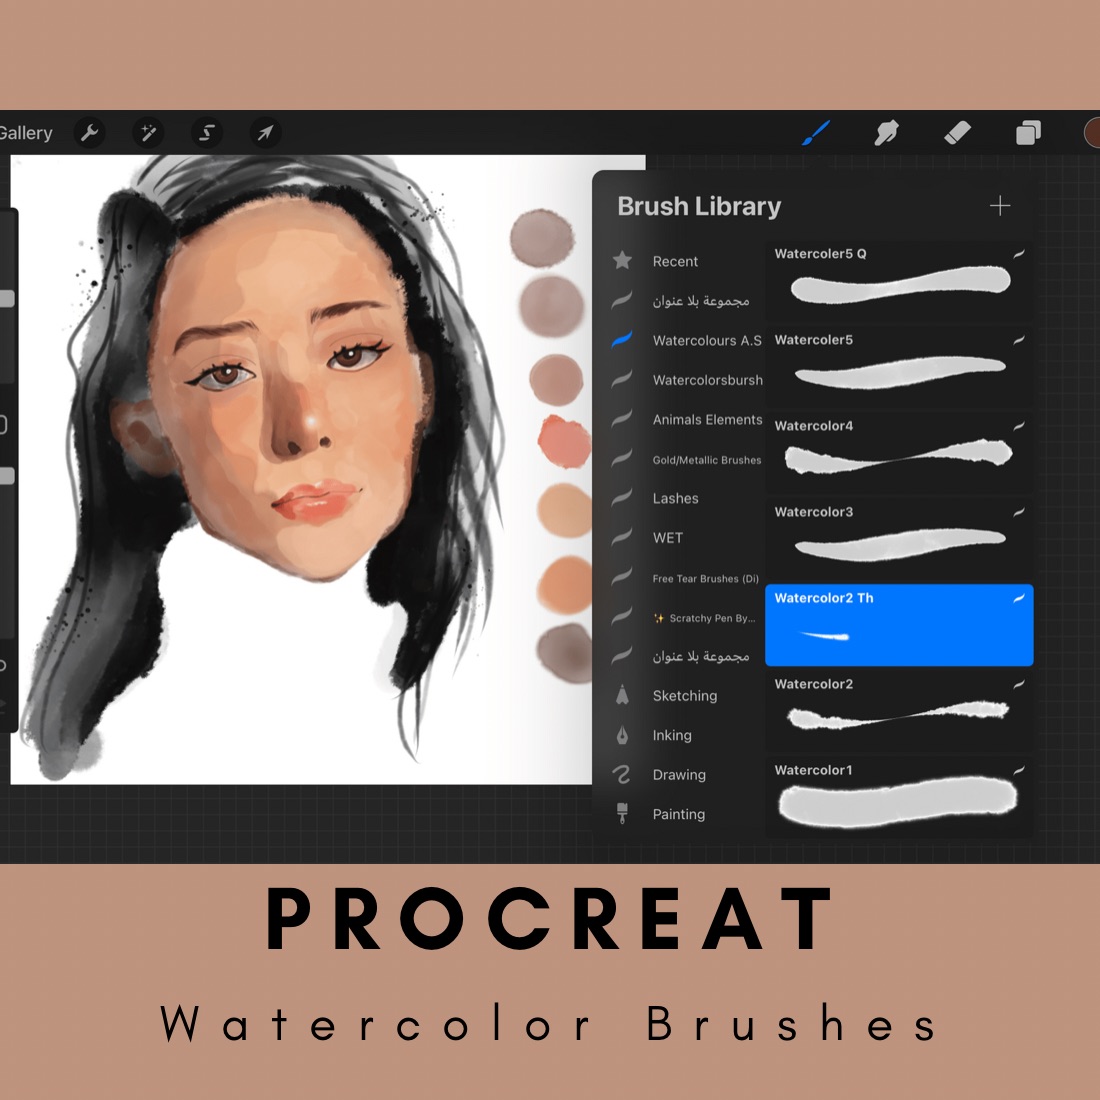 Procreate Watercolor Brushes - main image preview.